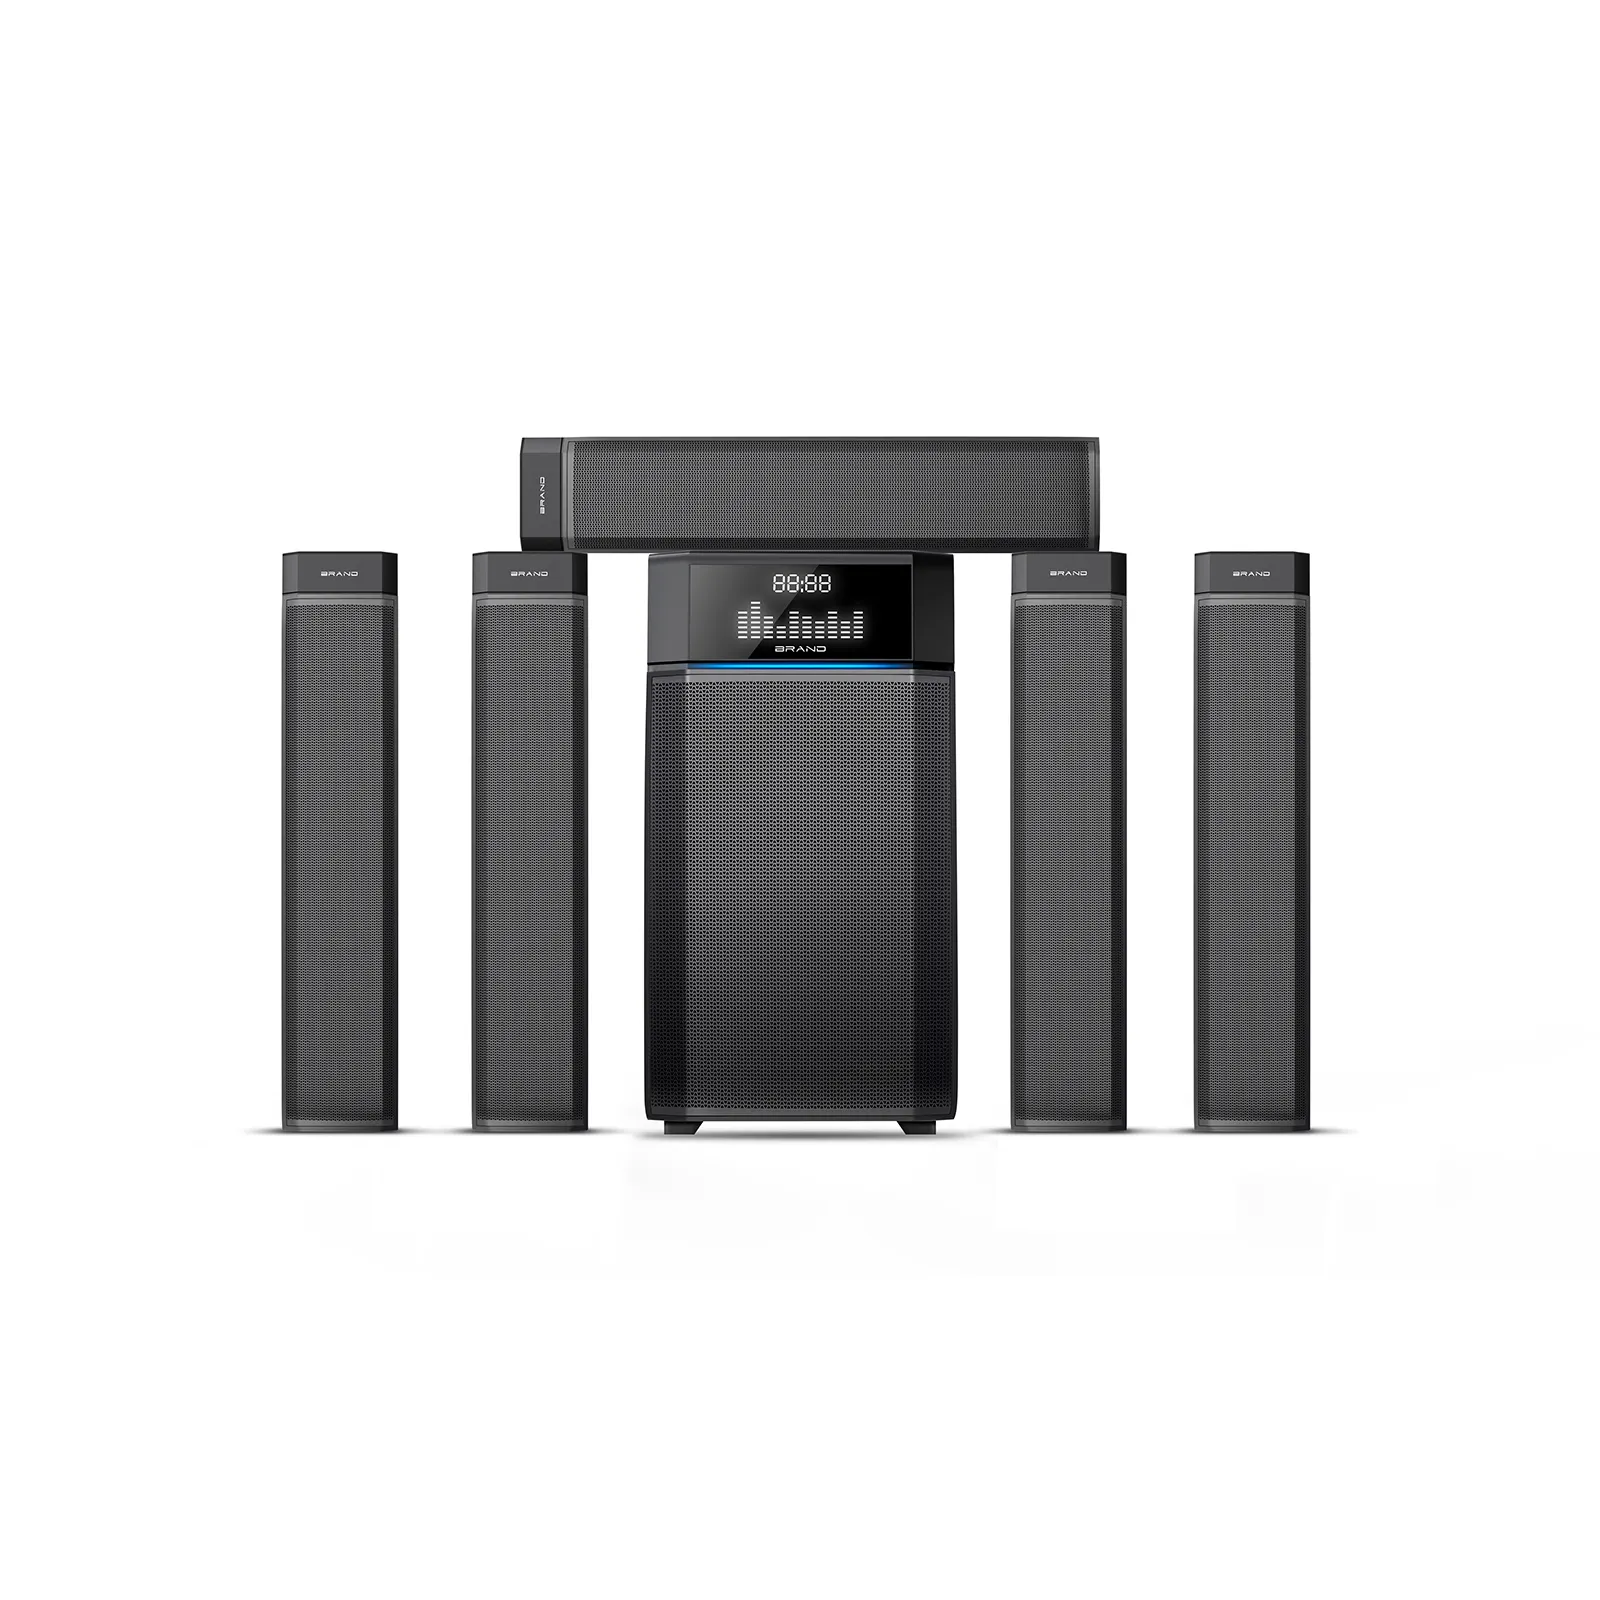 TK-2022 7.1 Home Theater Surround Sound System 5.1 Home Theater System Sound Bar dengan Subwoofer